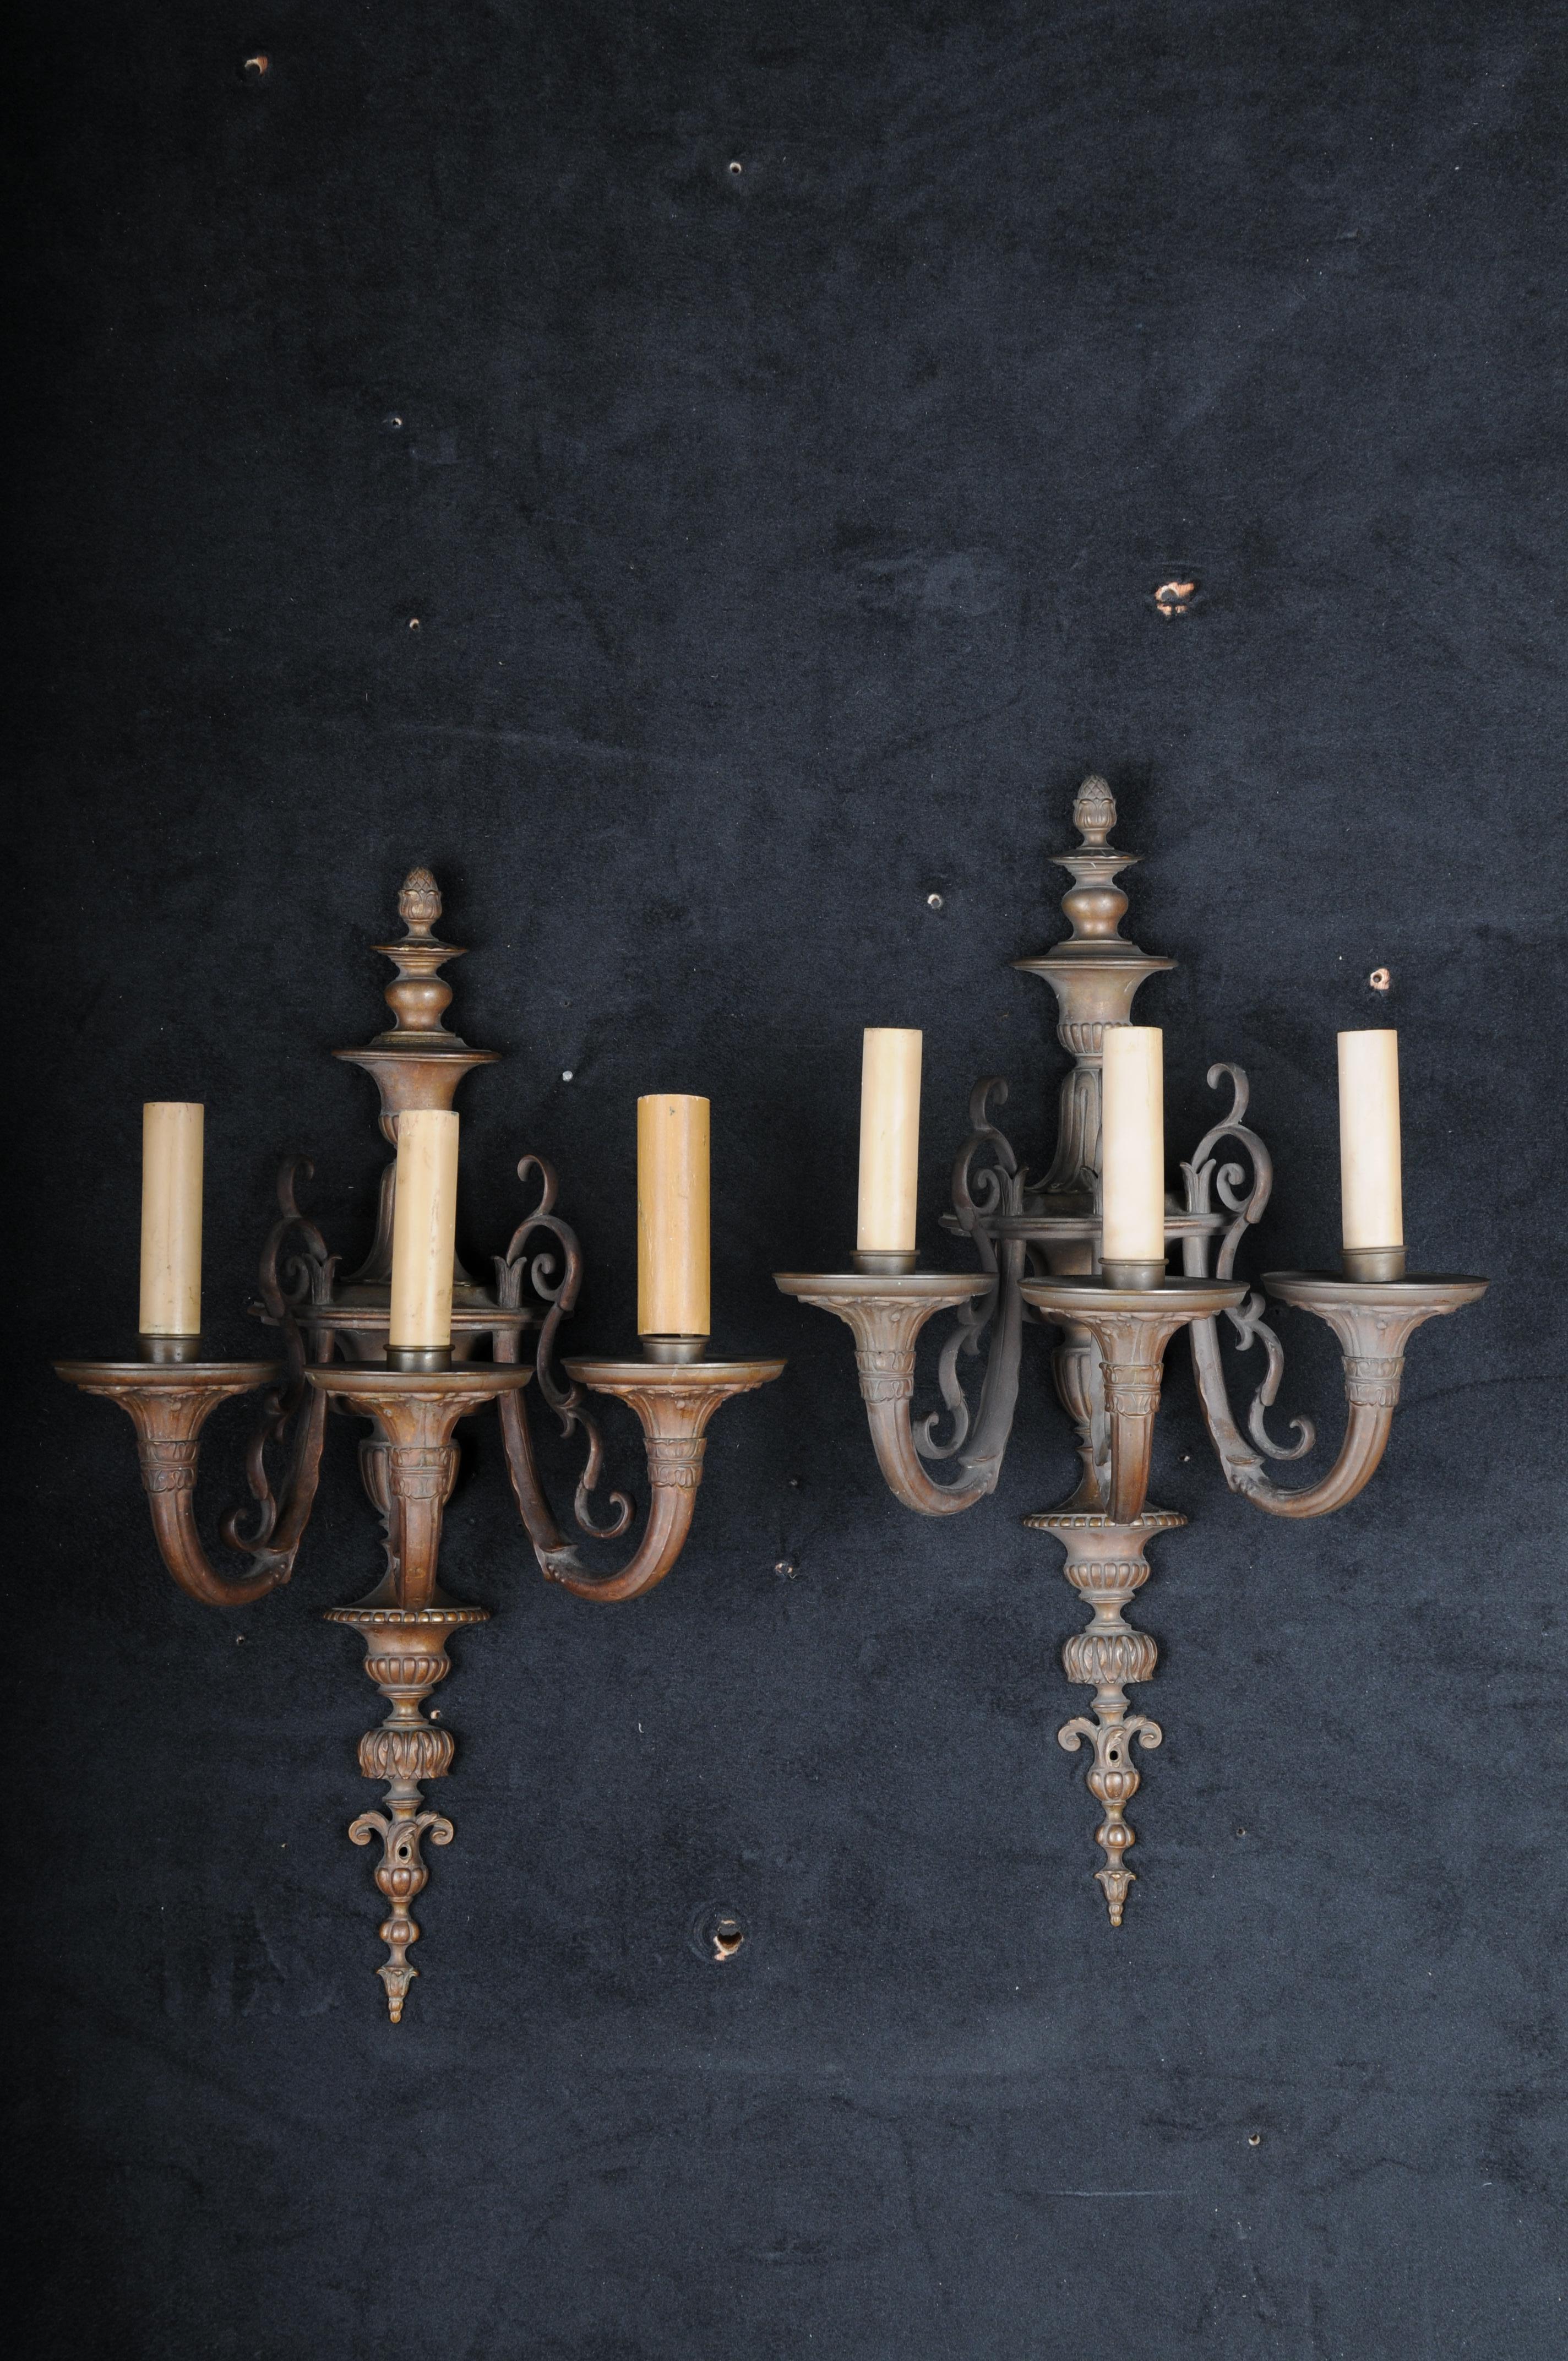 20th beautiful bronze Wall Lamp/sconces in Louis XVI
Classic French Louis XVI style sconces. Each with three curved light arms
Electrified and operational.